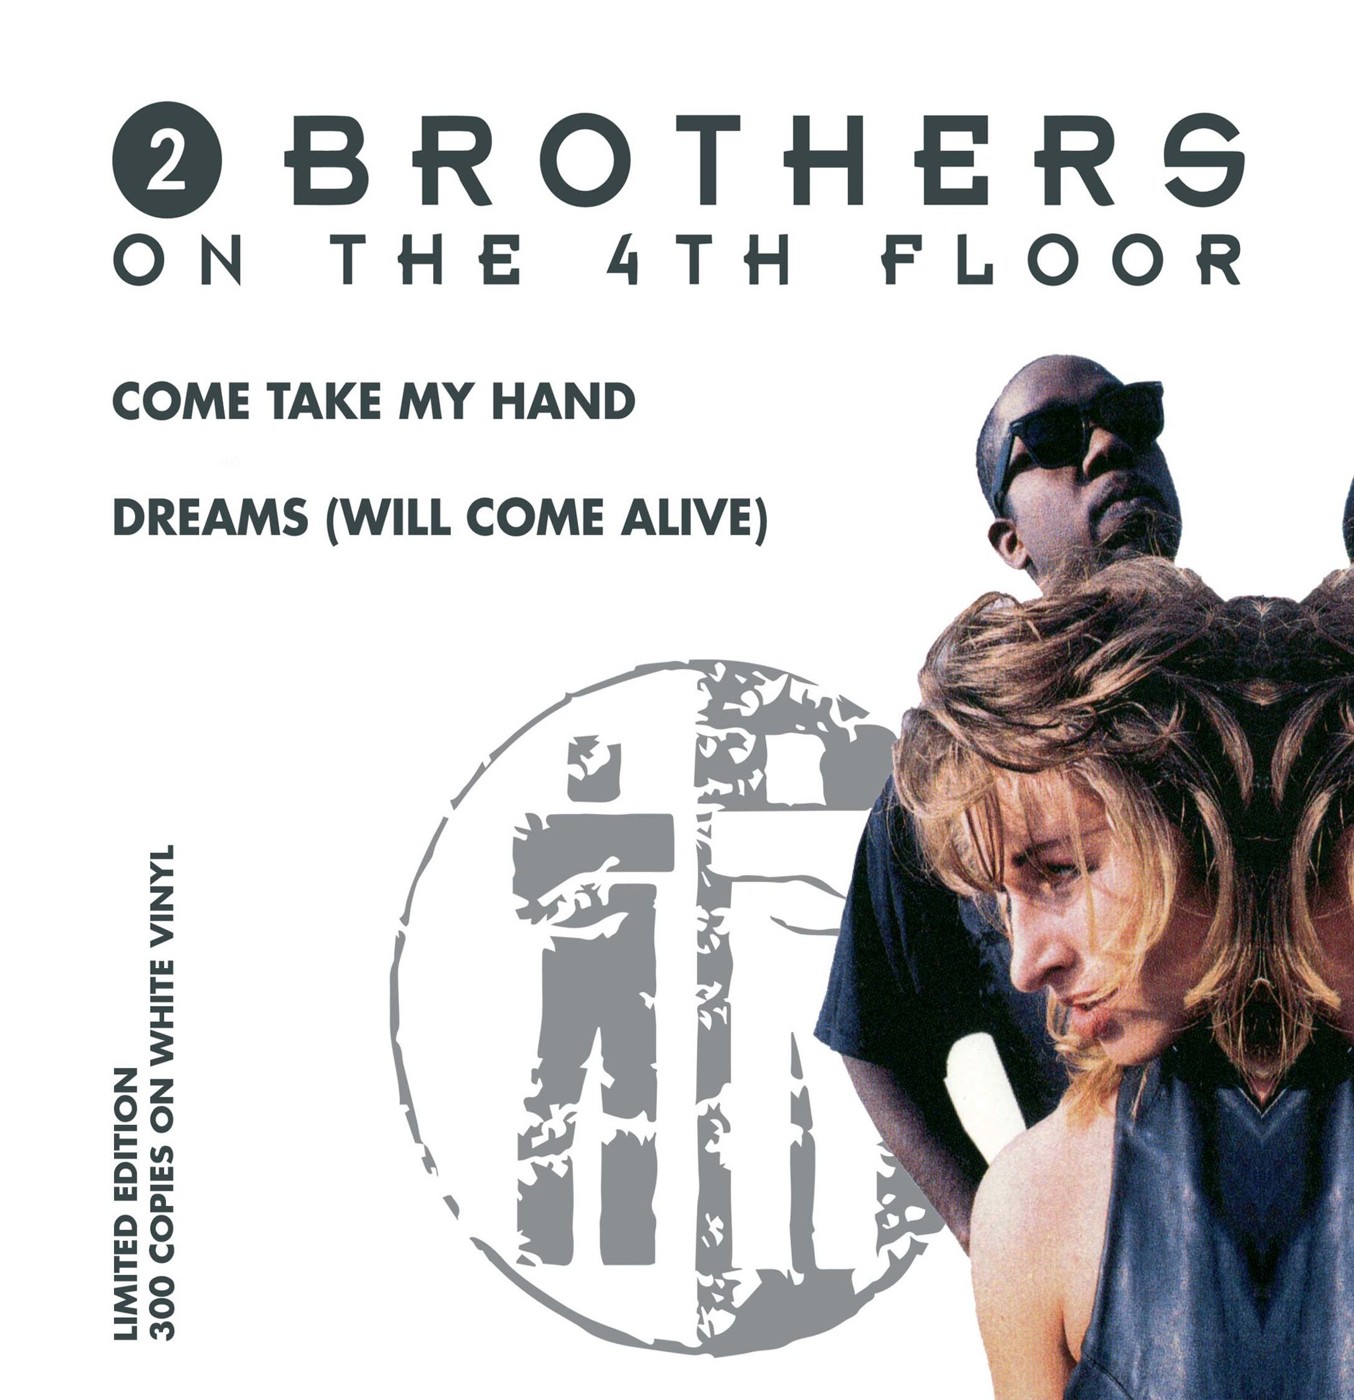 2 brothers come take. 2 Brothers on the 4th Floor Dreams 1994. Группа 2 brothers on the 4th Floor. 2 Brothers on the 4th Floor - Dreams (will come Alive). "Come take my hand".